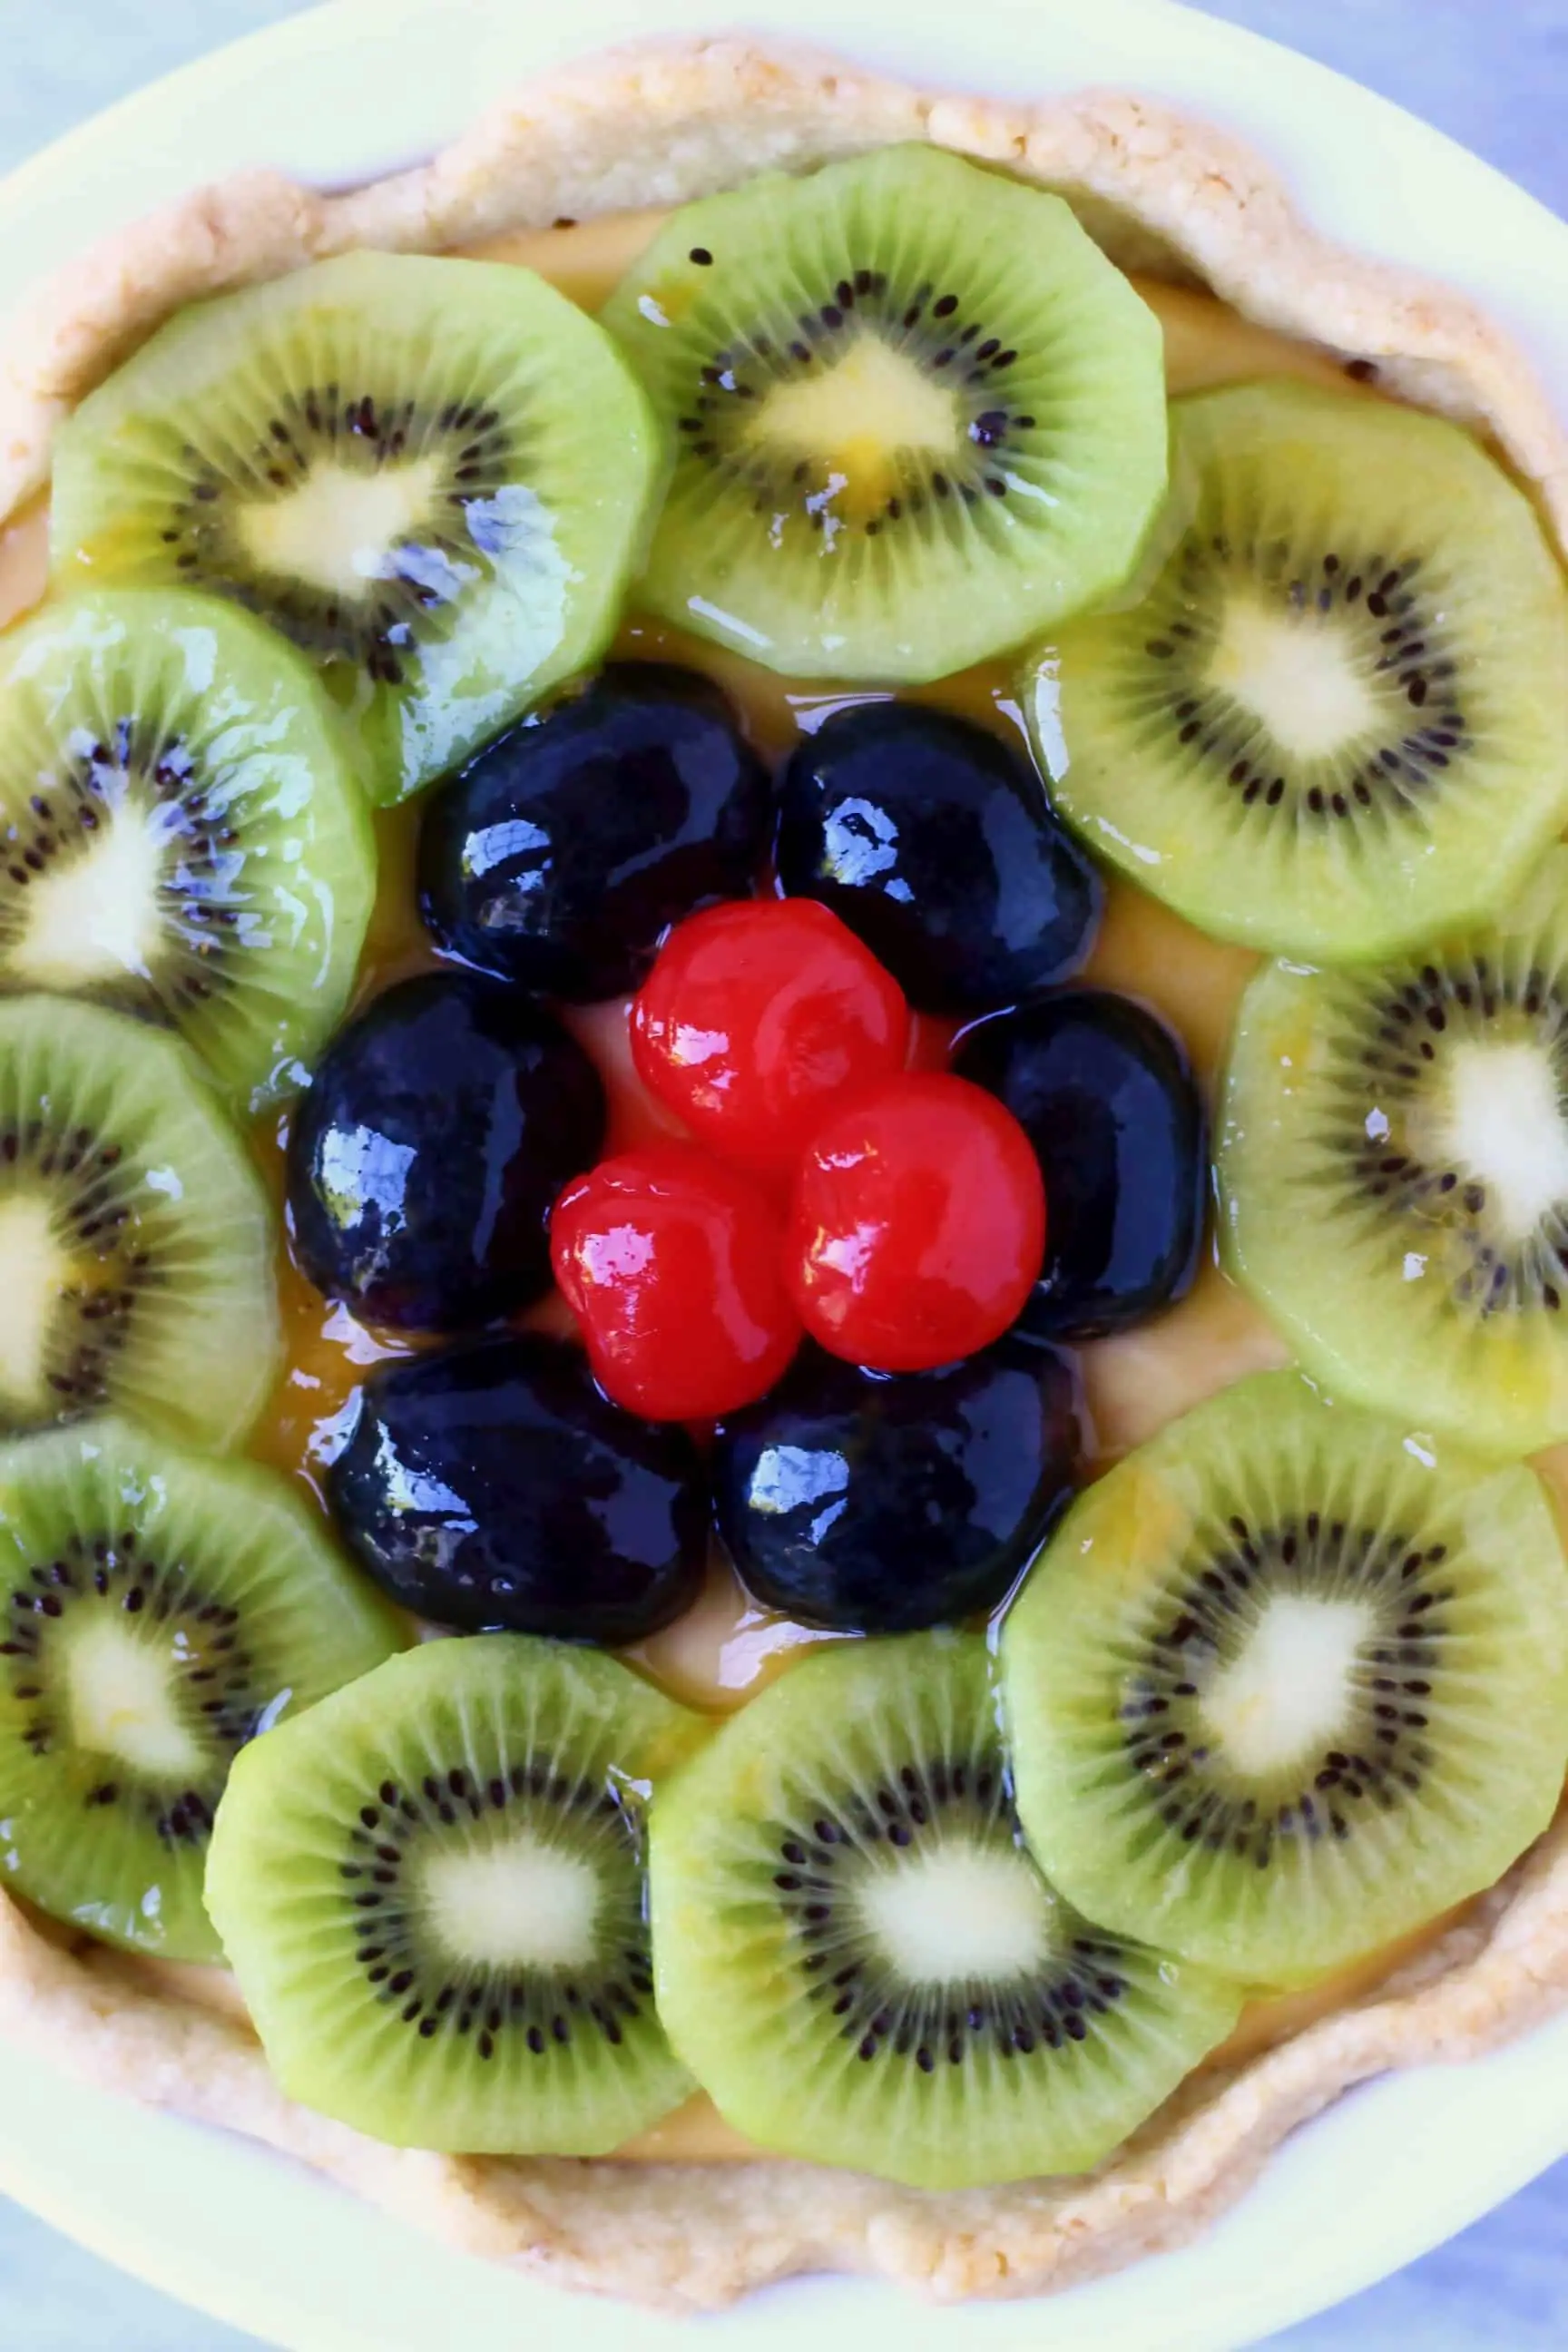 Kiwi slices, black grapes and red cherries on top of a fruit tart in a white pie dish